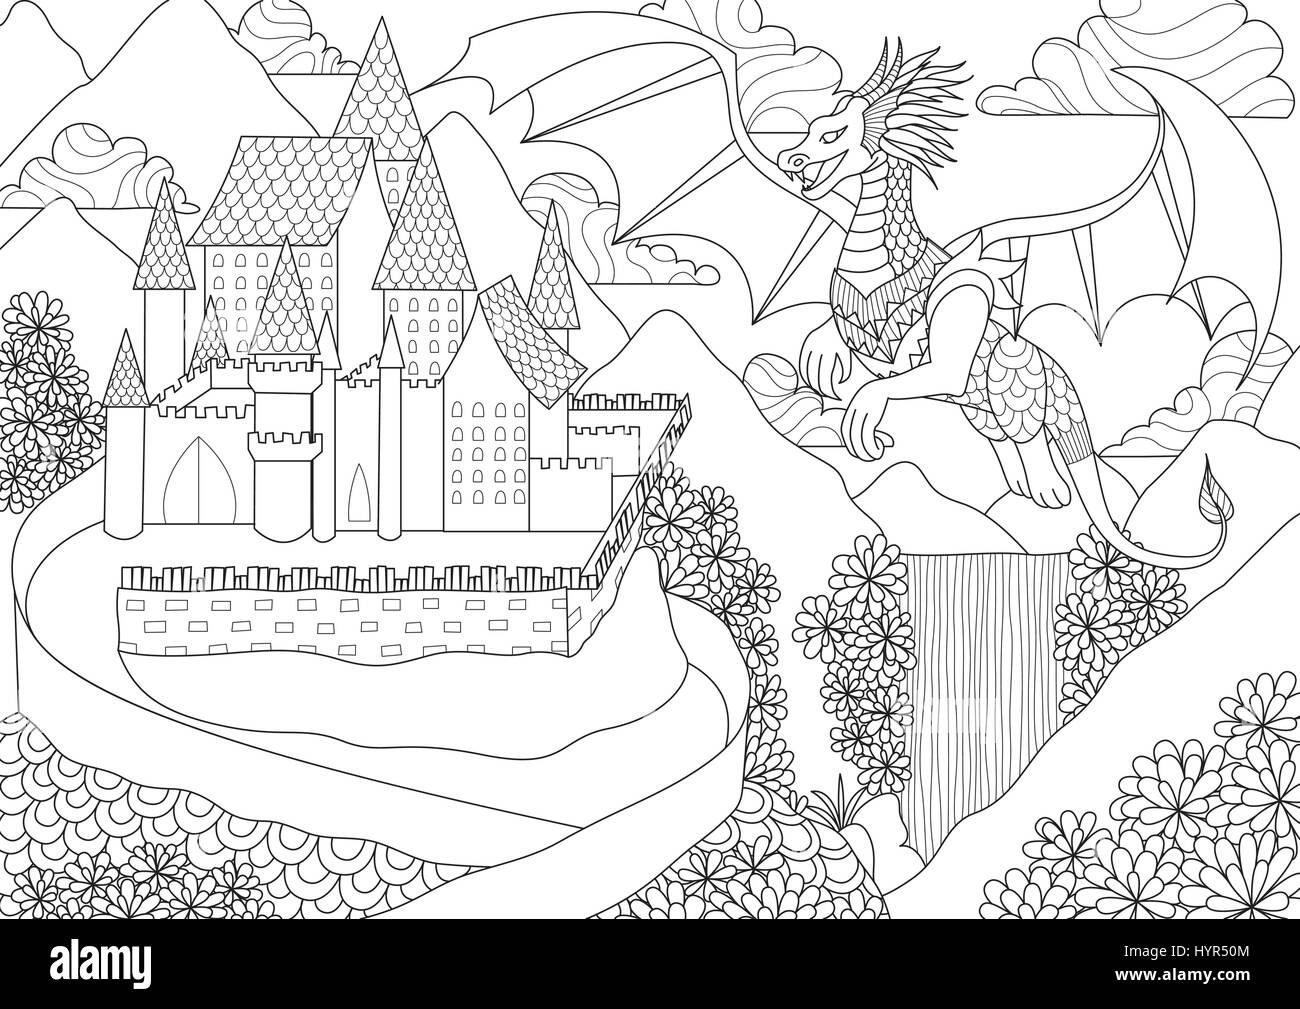 332,122 Adult Coloring Books Images, Stock Photos, 3D objects